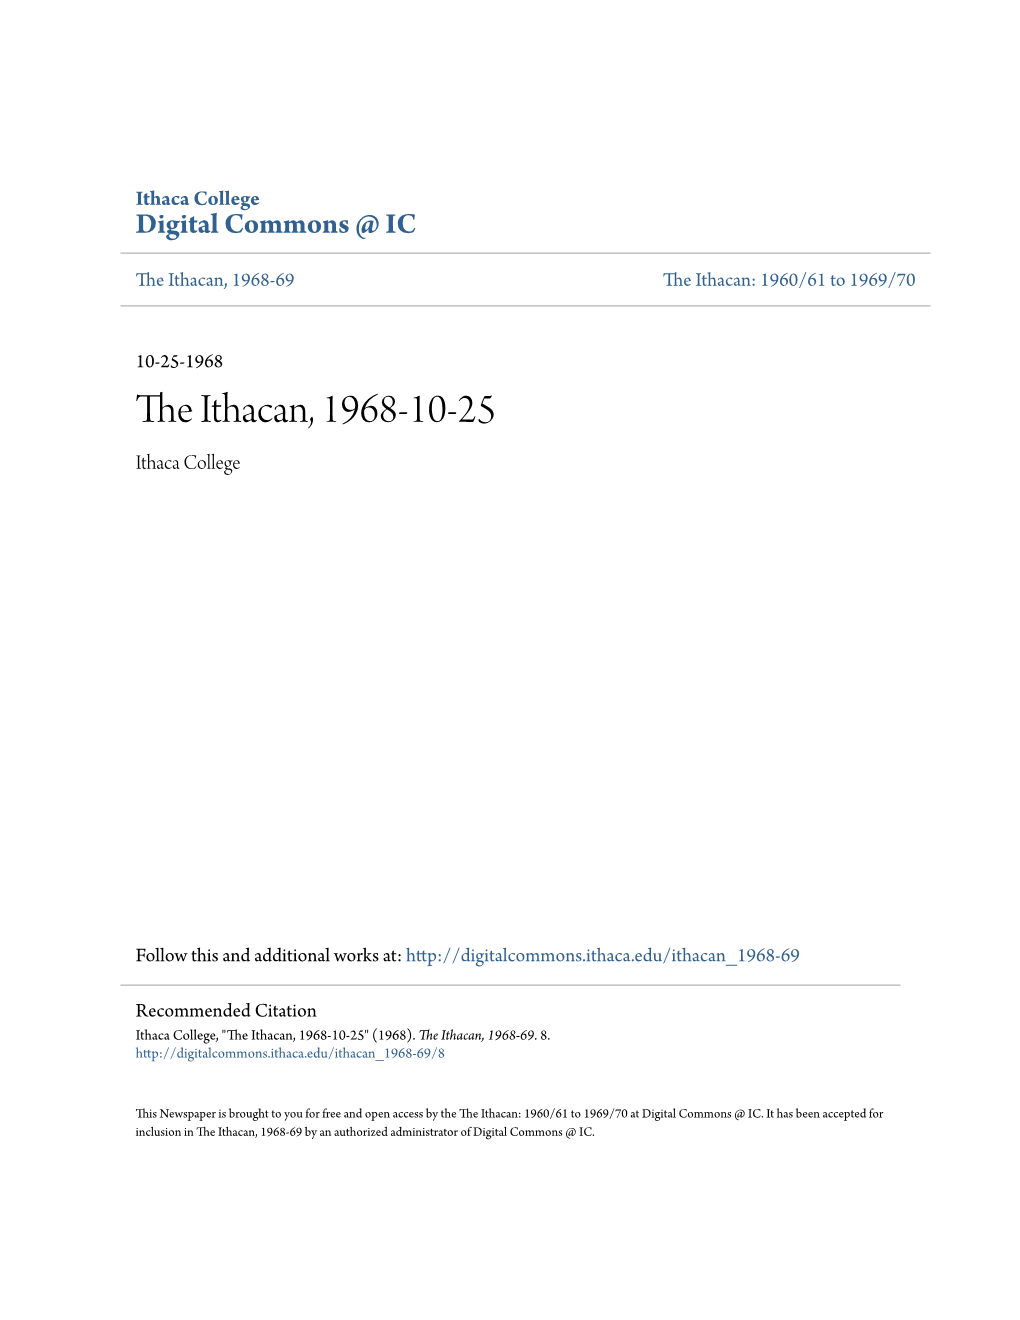 The Ithacan, 1968-10-25